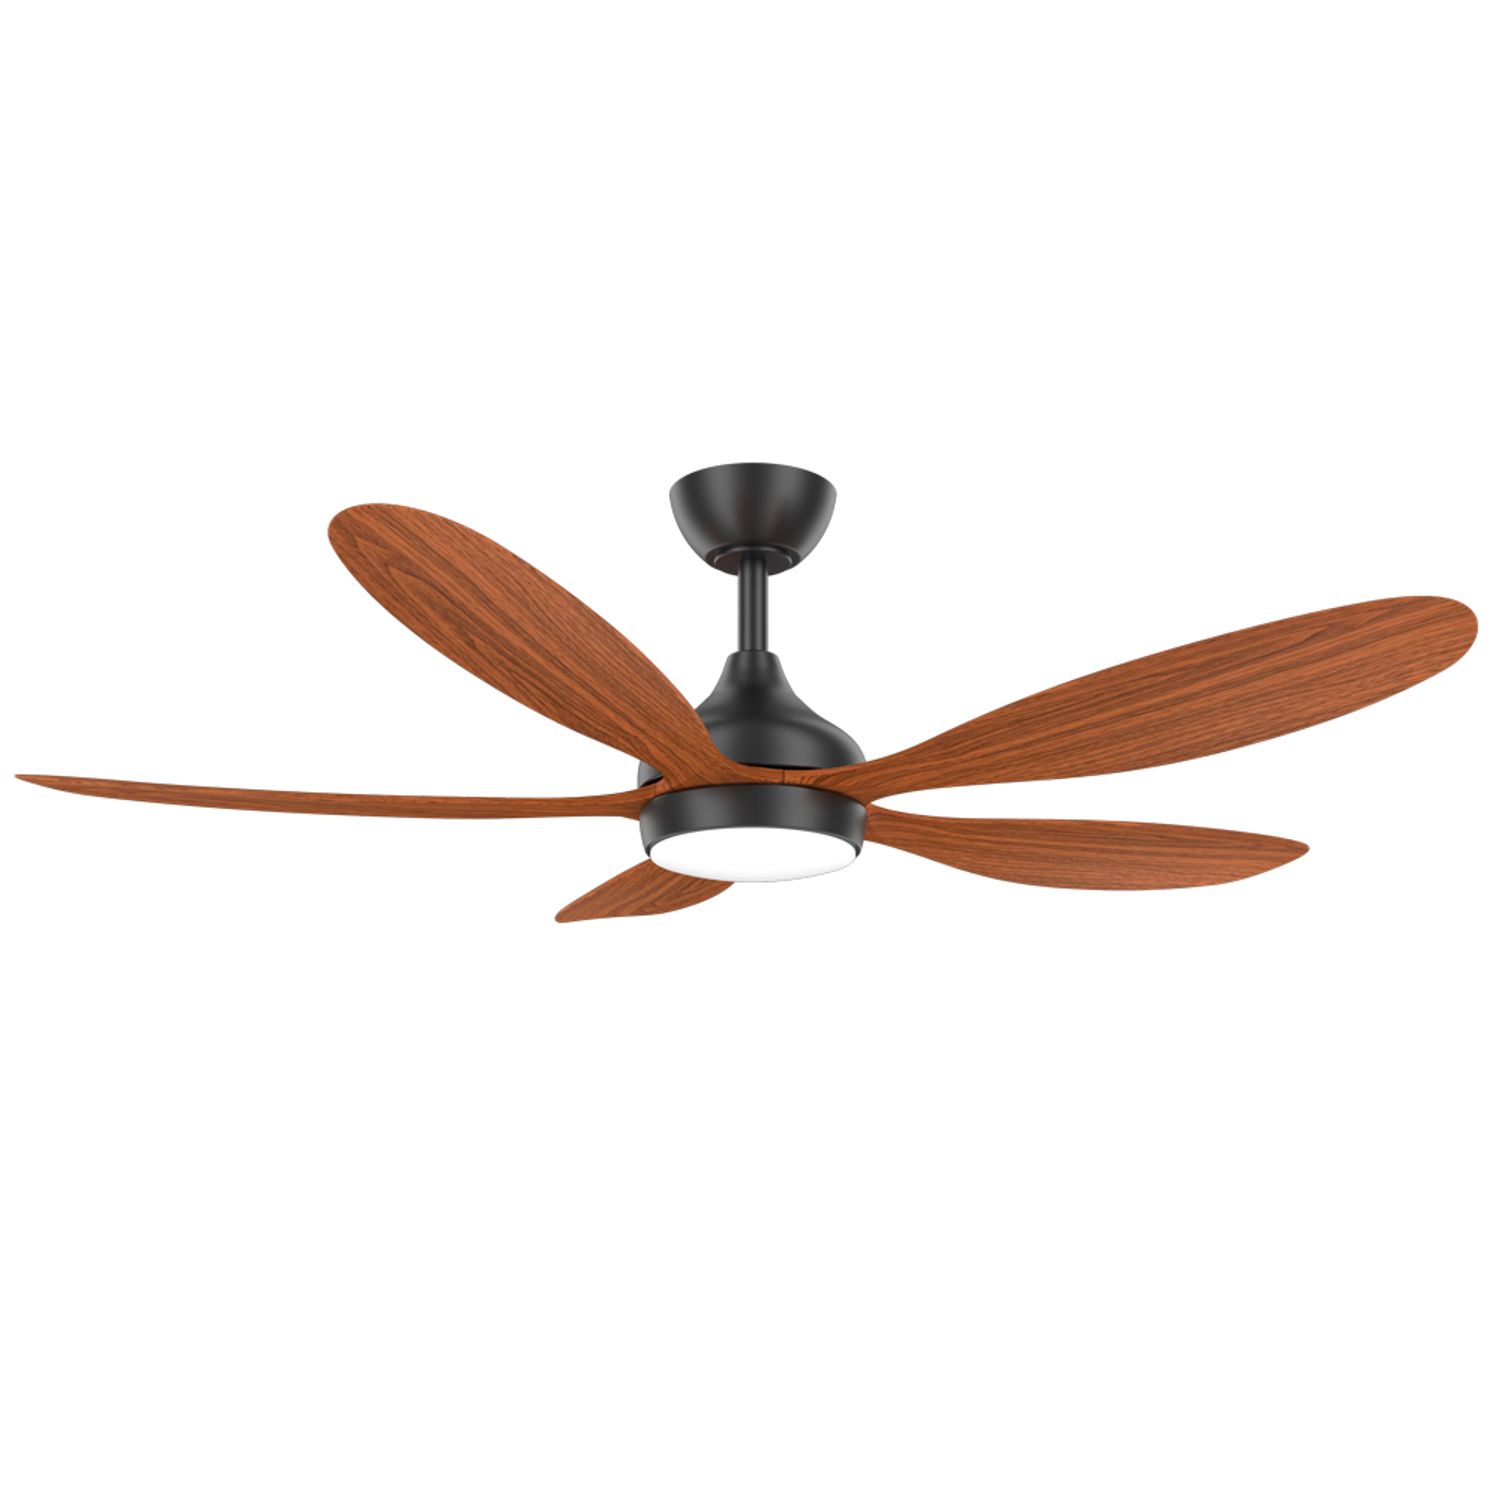 KBS black and dark wooden modern ceiling fan with dimmable light and smartphone control